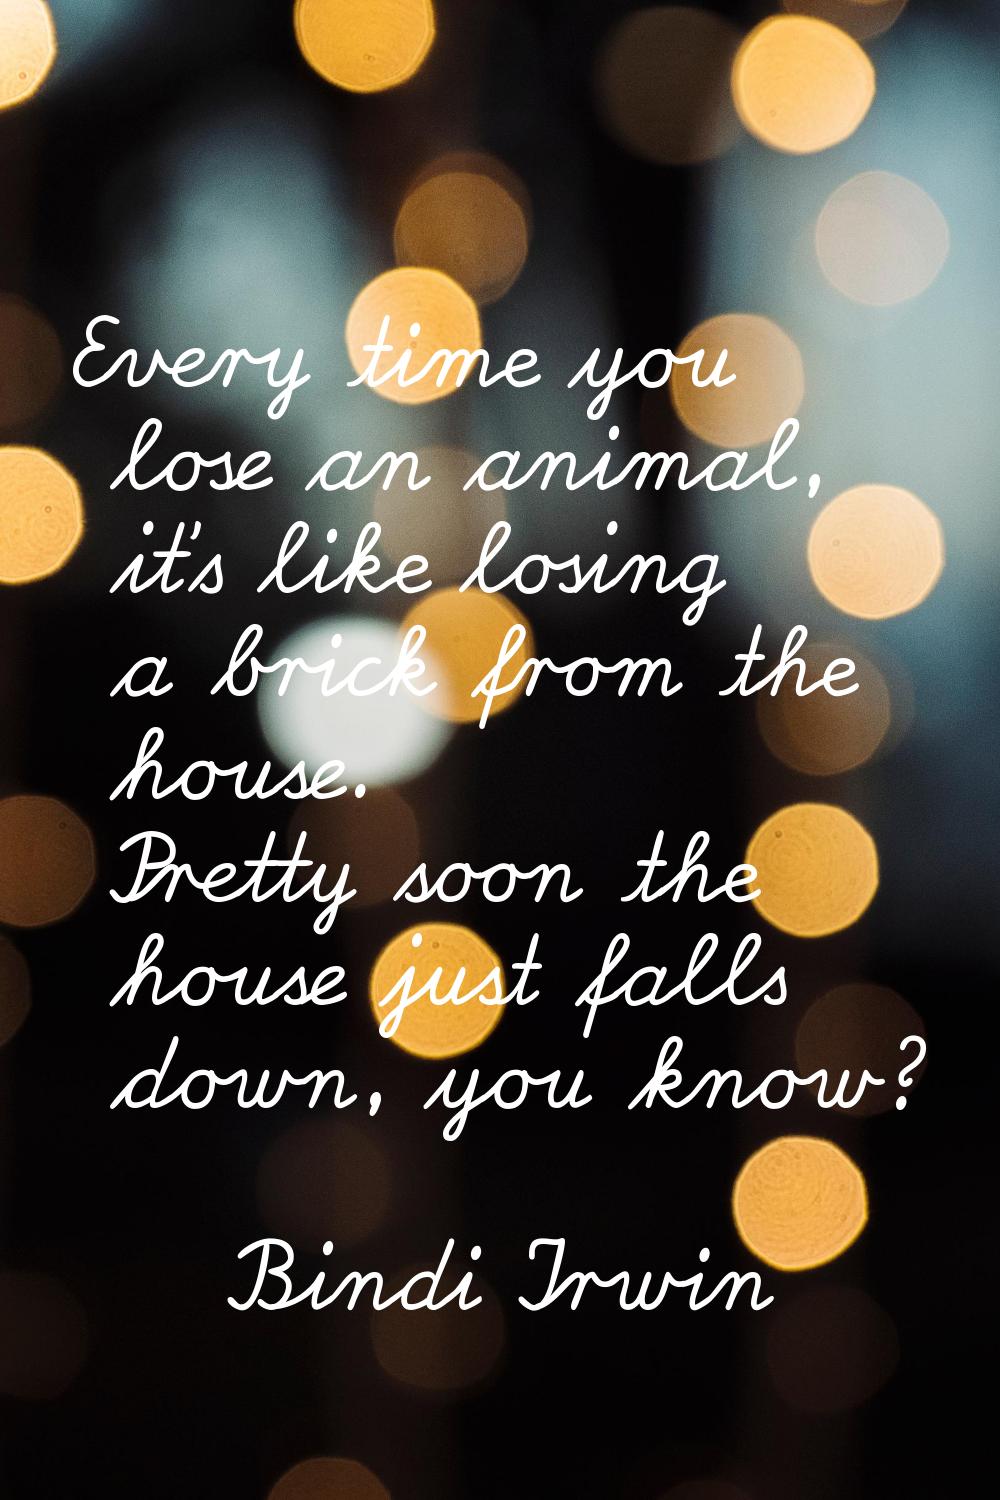 Every time you lose an animal, it's like losing a brick from the house. Pretty soon the house just 